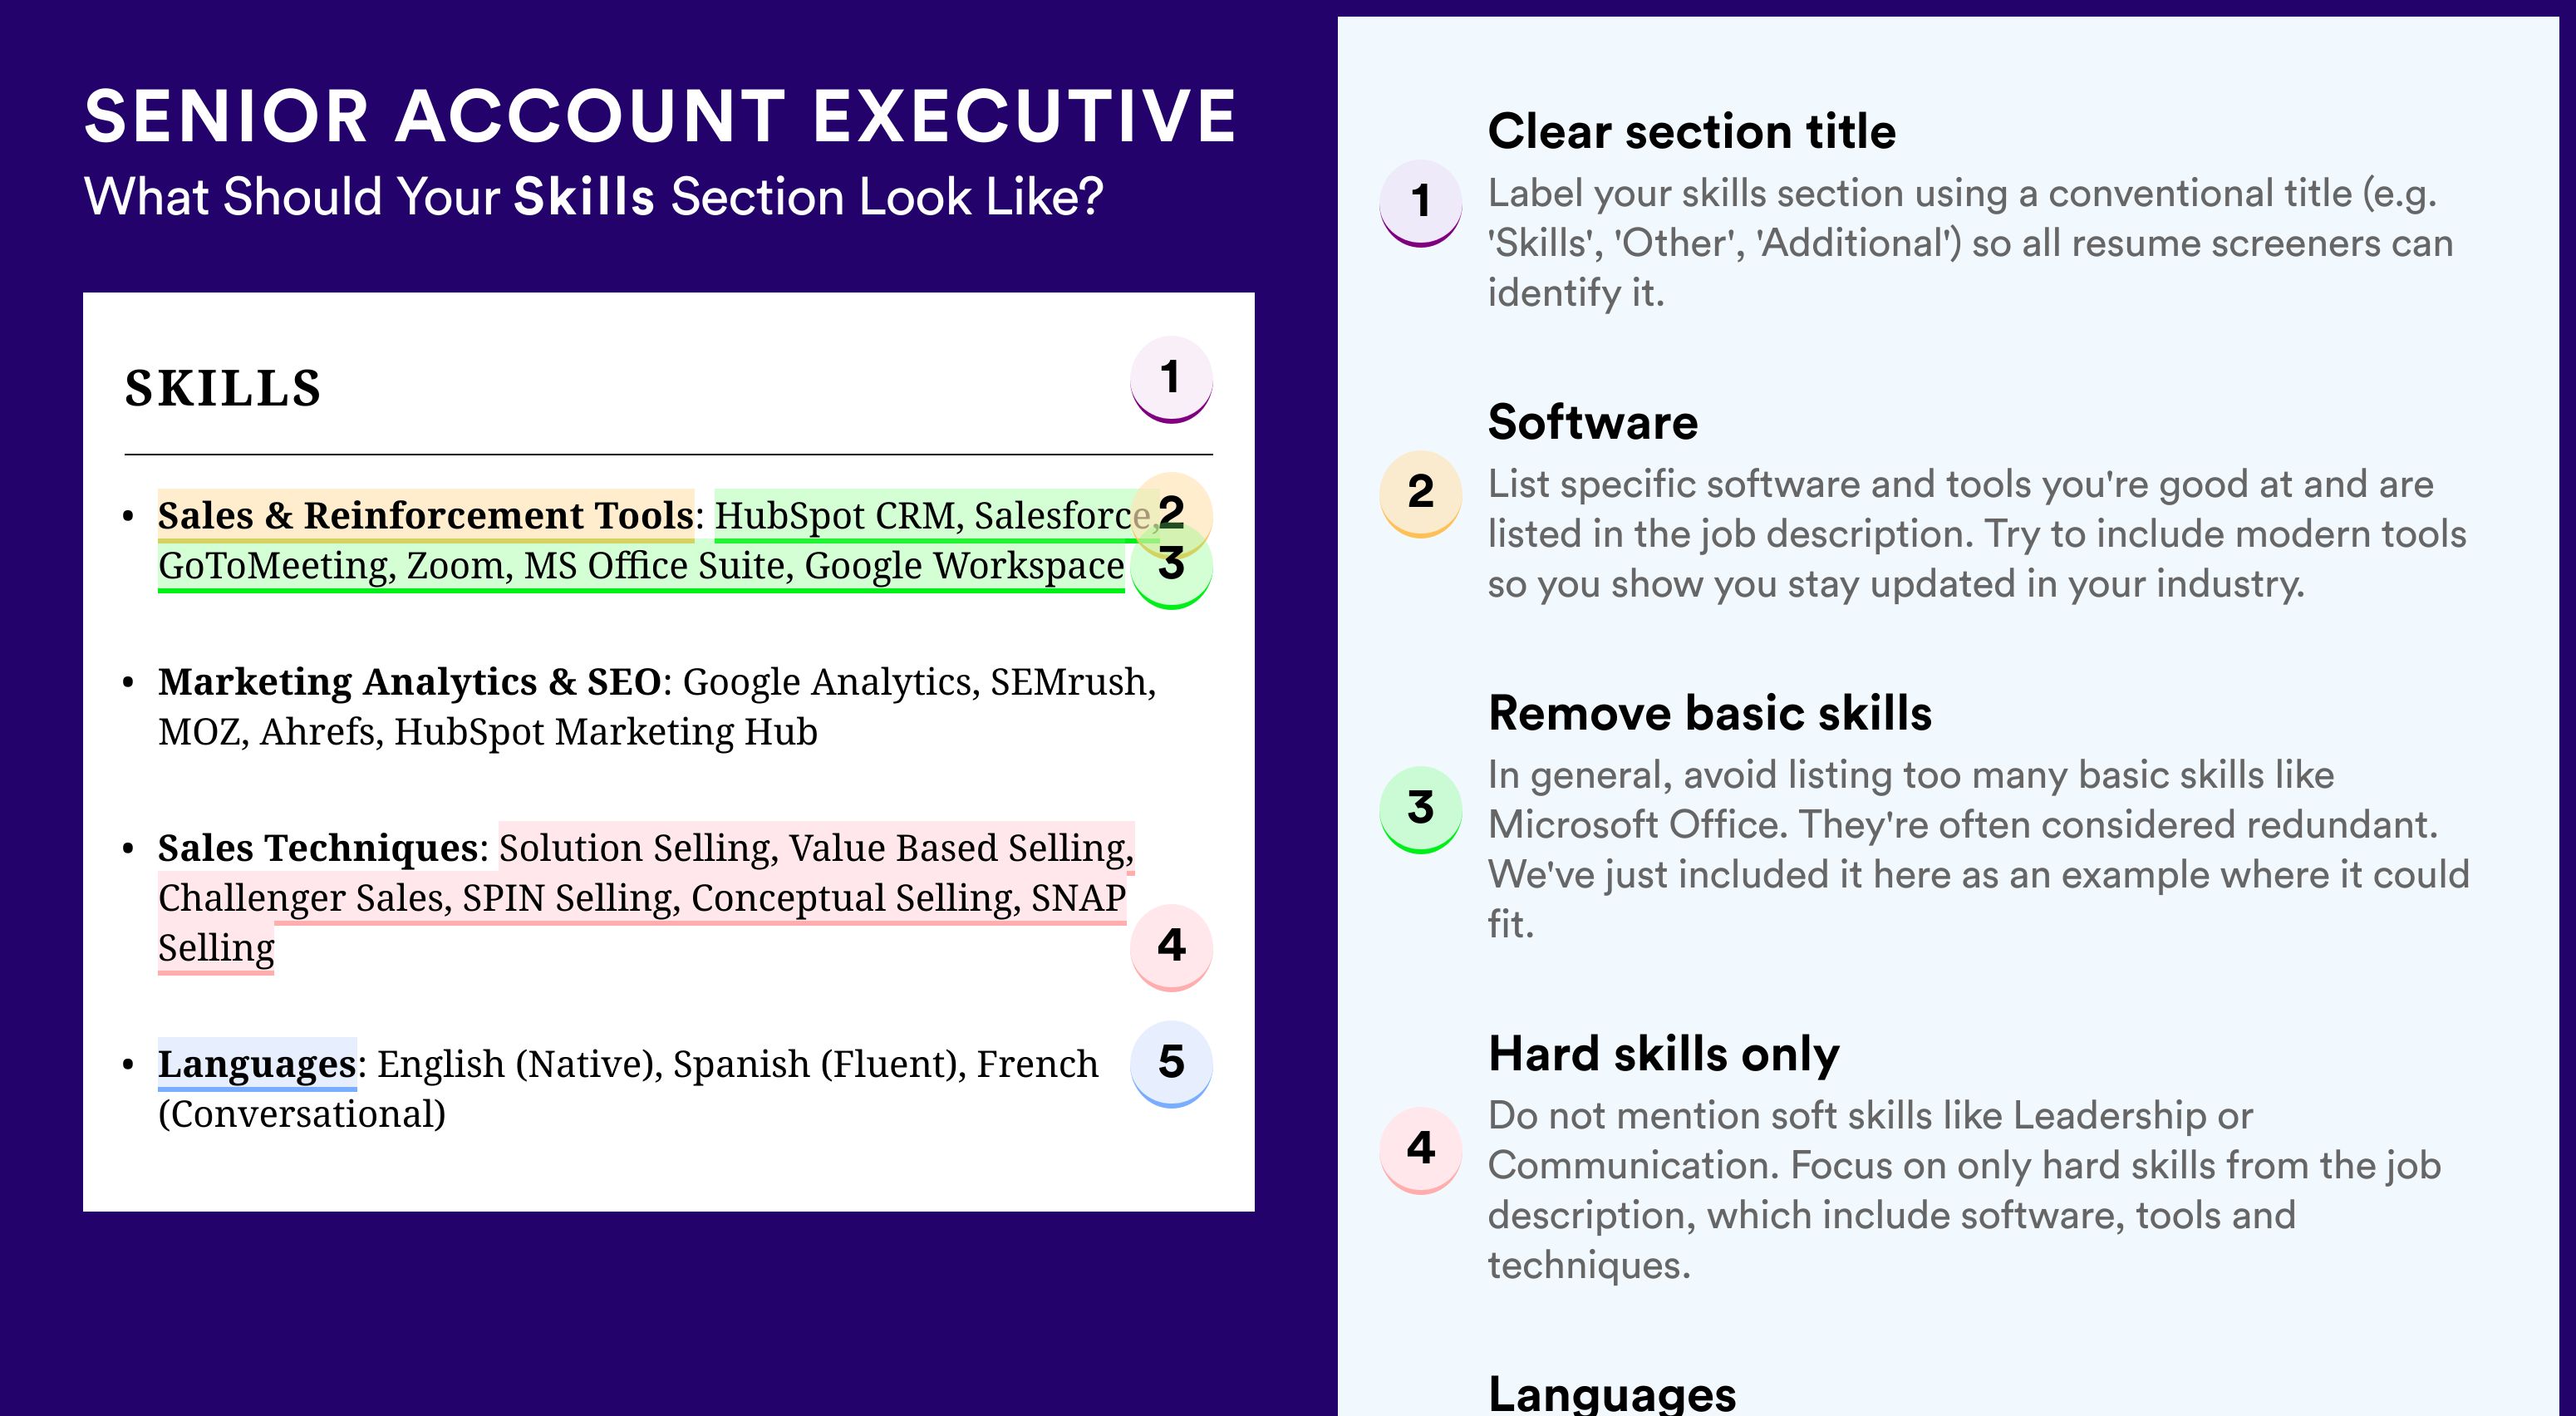 How To Write Your Skills Section - Senior Account Executive Roles